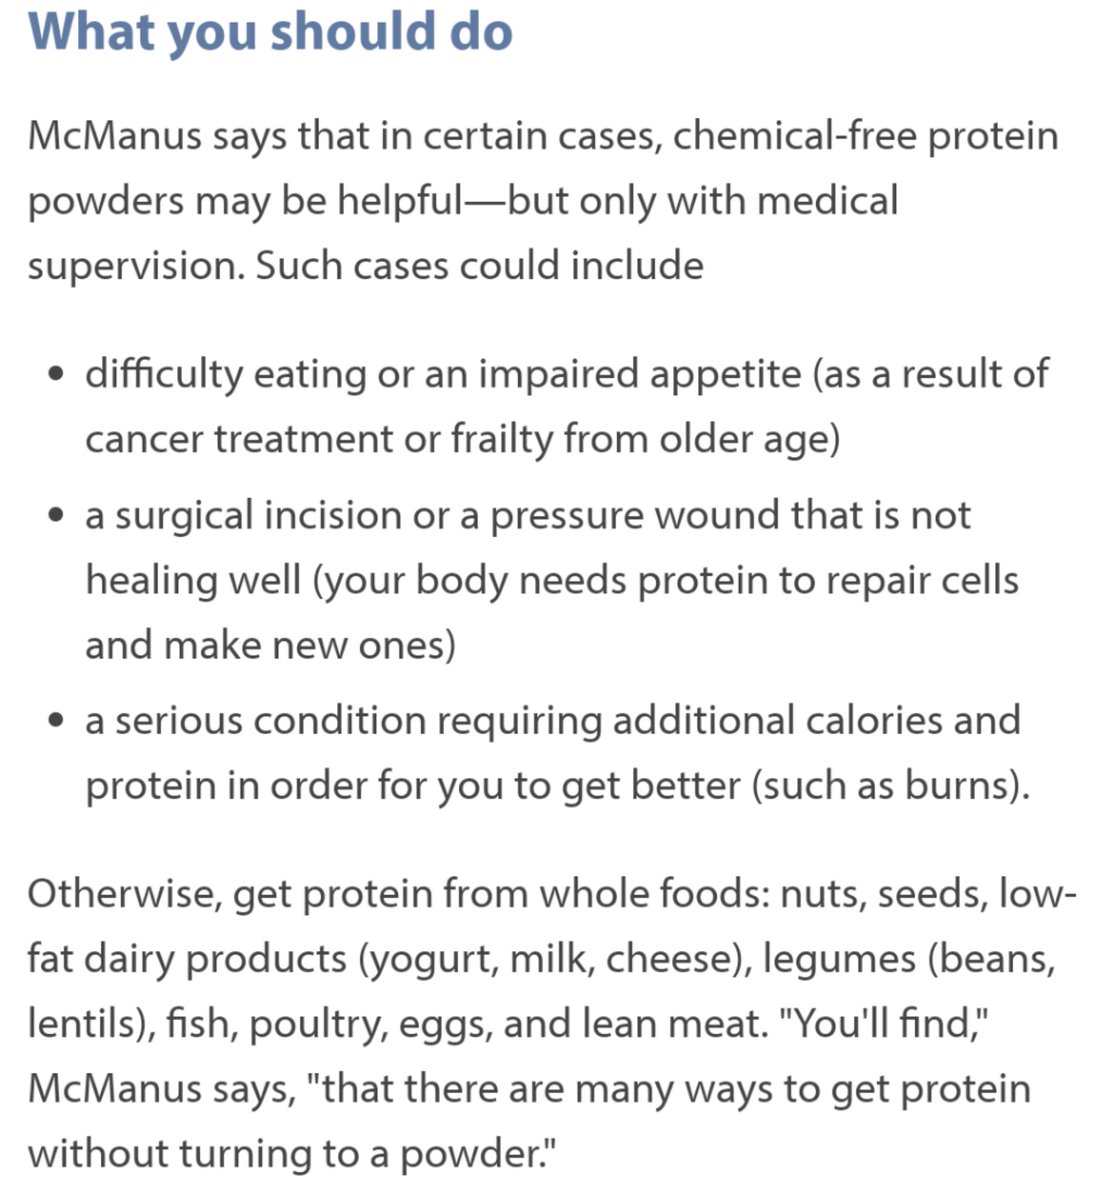 Ignore this bullshit too.Unless you have some medical condition which requires you to reduce protein intake, go ahead and have whey protein to fulfill your protein requirements. The only sideffects are that you'll get jacked, stronger, better hair+skin and overall better health